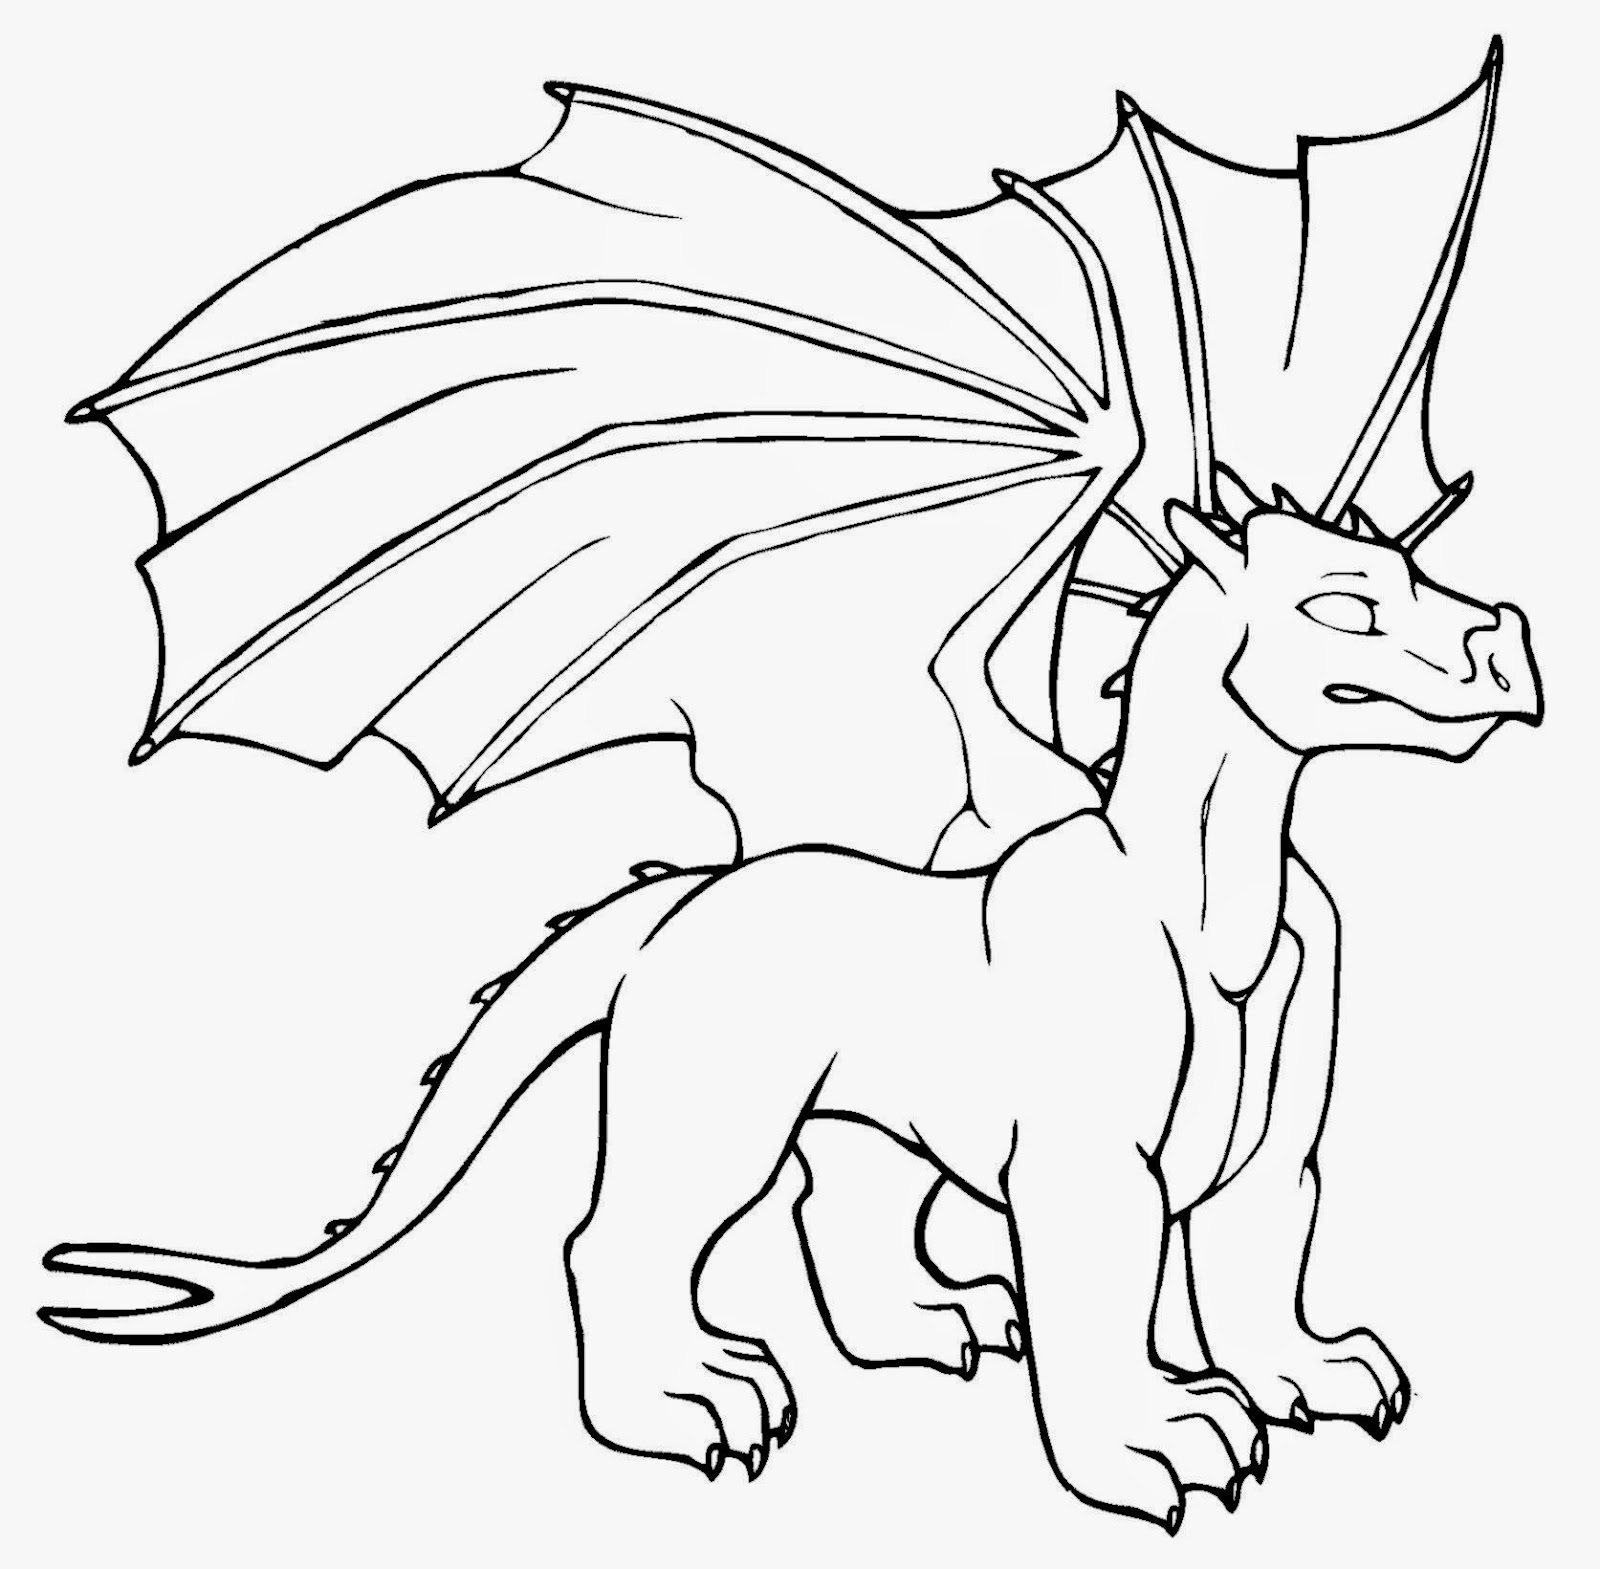 Coloring pages Dragons 33 coloring pages Edupics